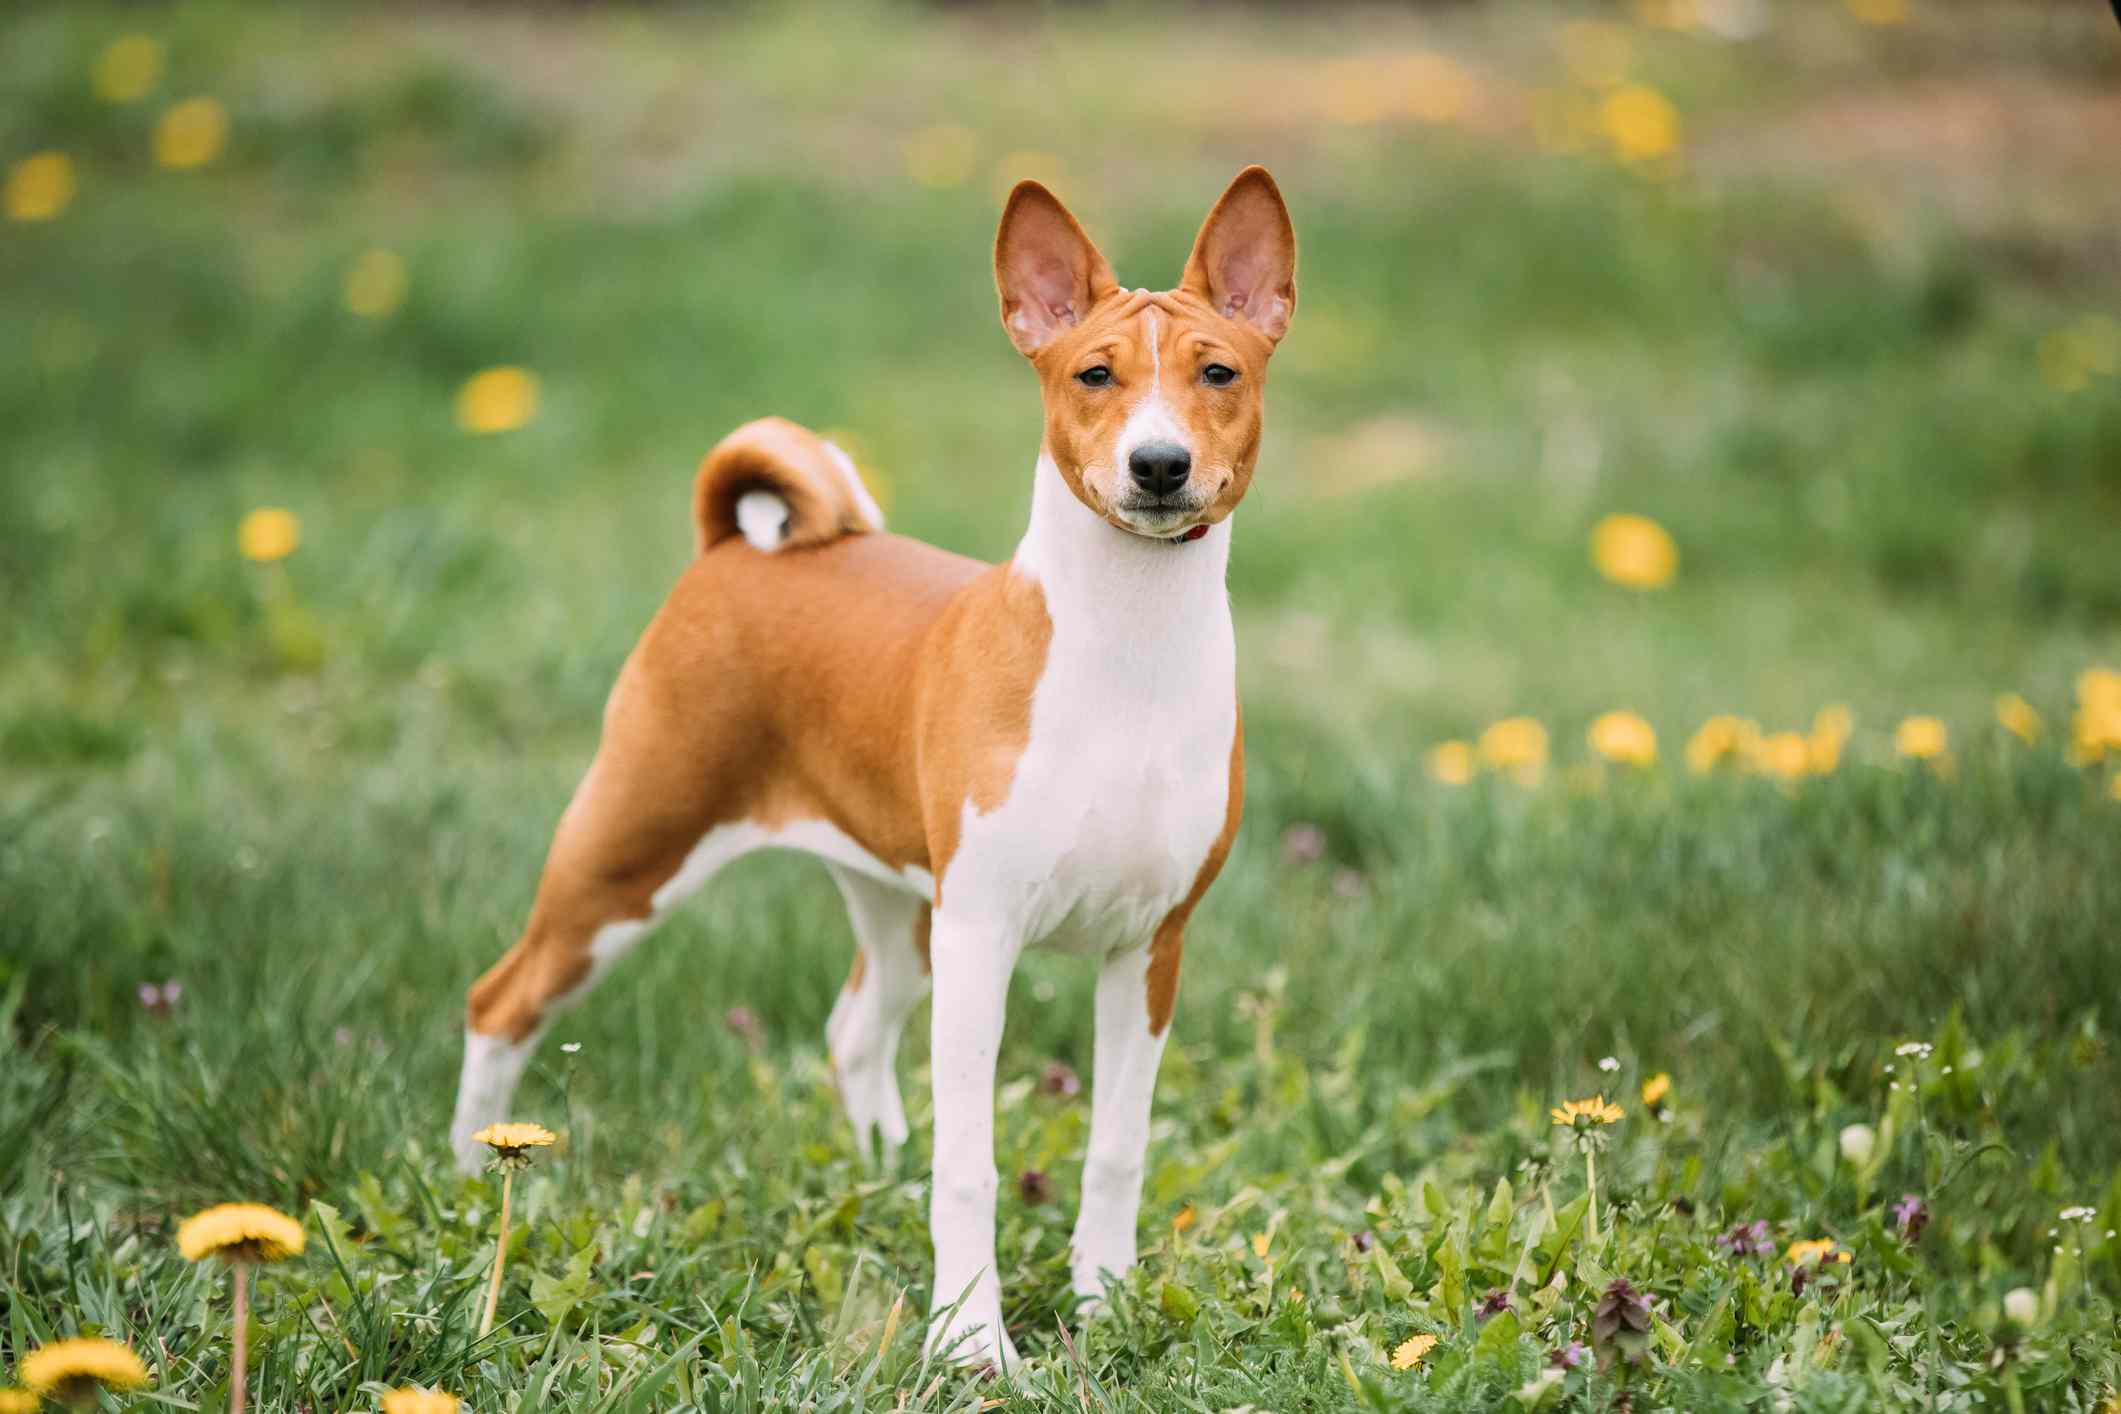 A red and white Basenji dog with perked ears and a curled tail standing in a field with dandelions and looking straight at the camera.